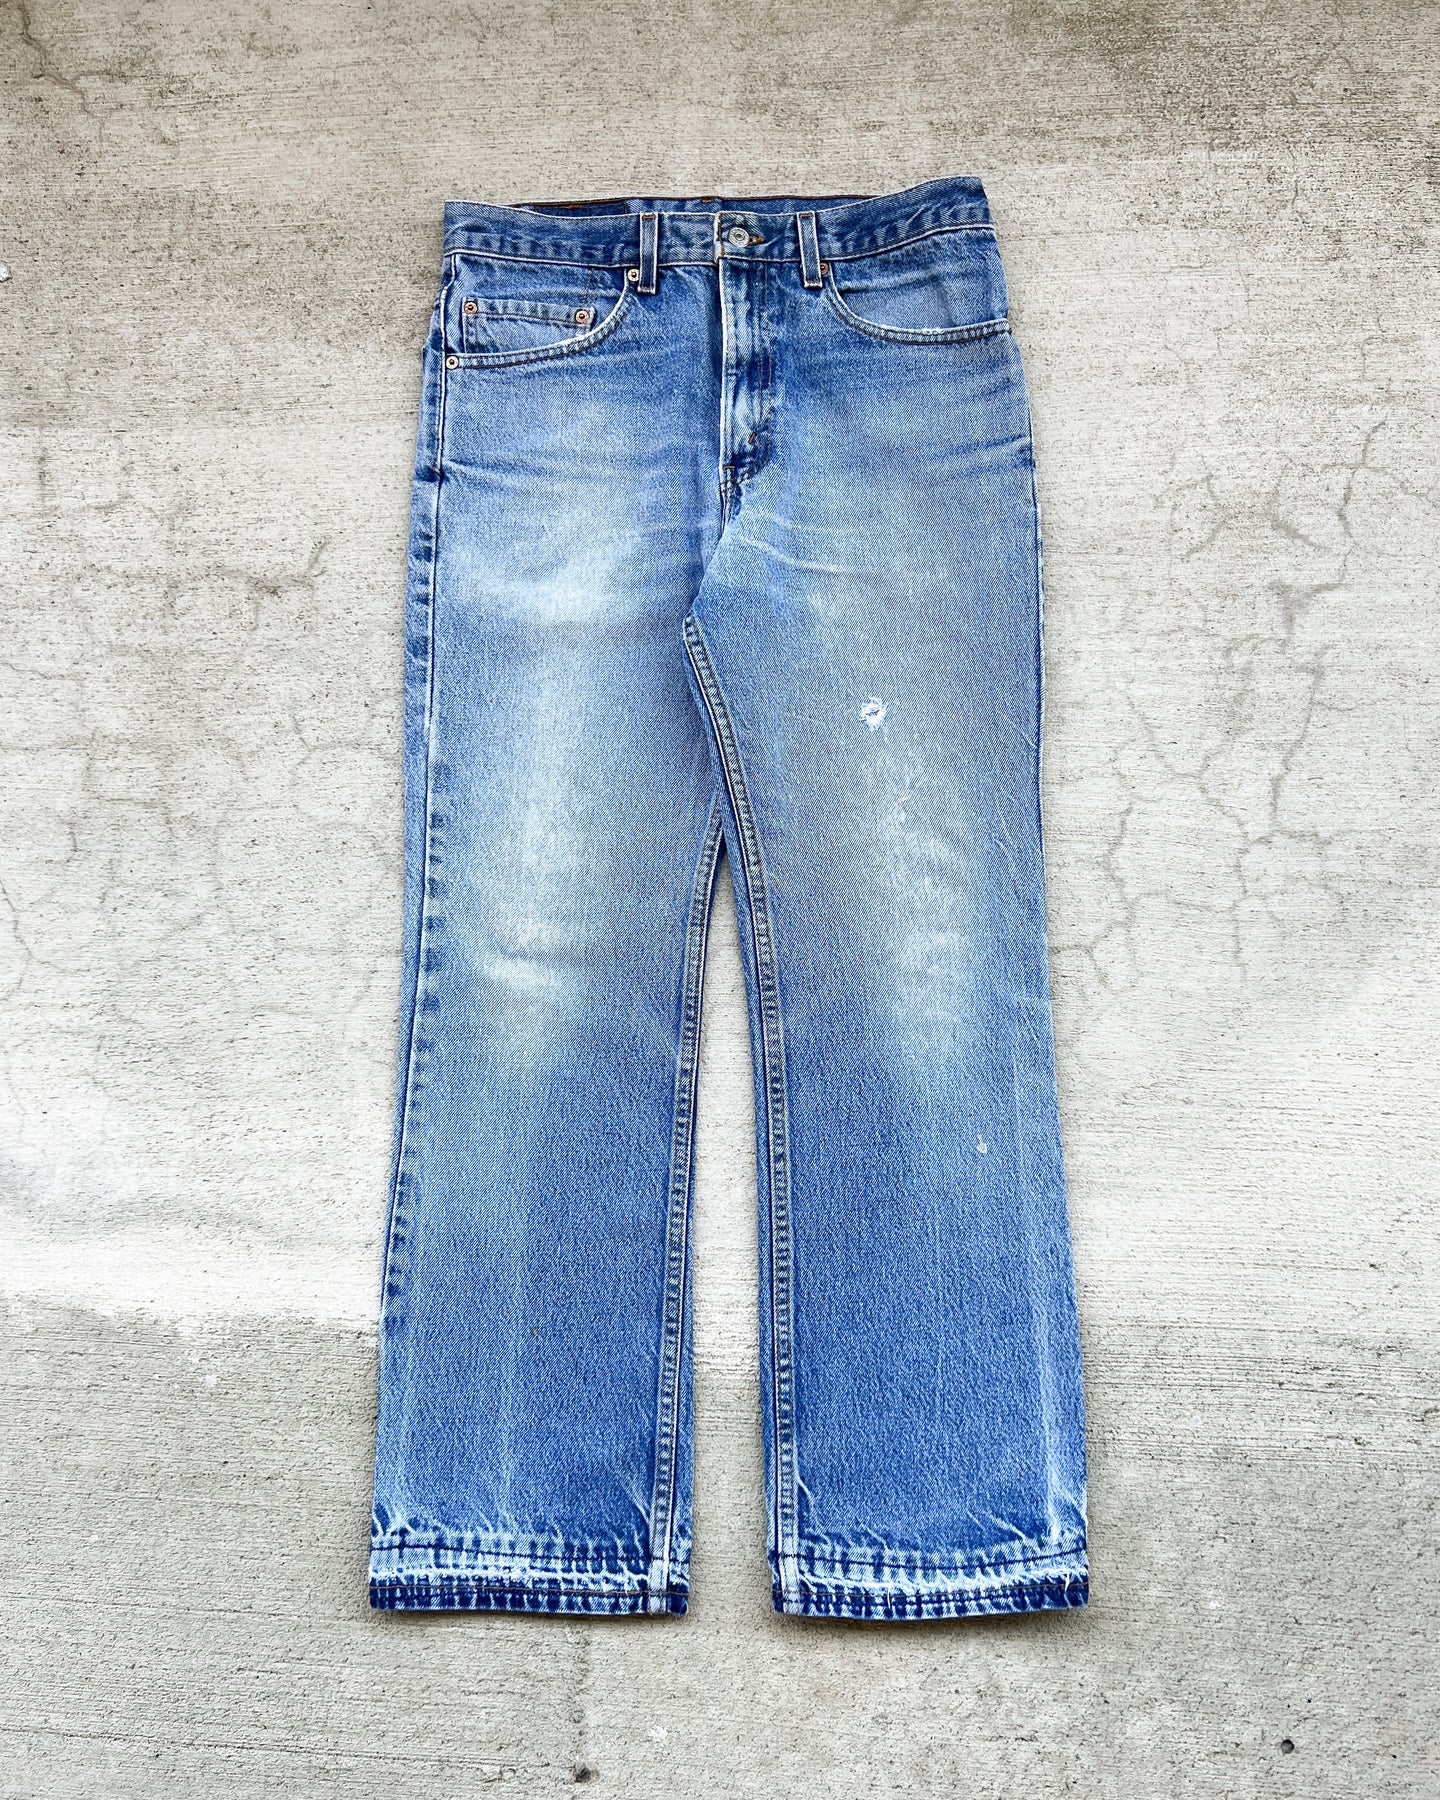 1990s Levi's Well Worn 517 - Size 33 x 30